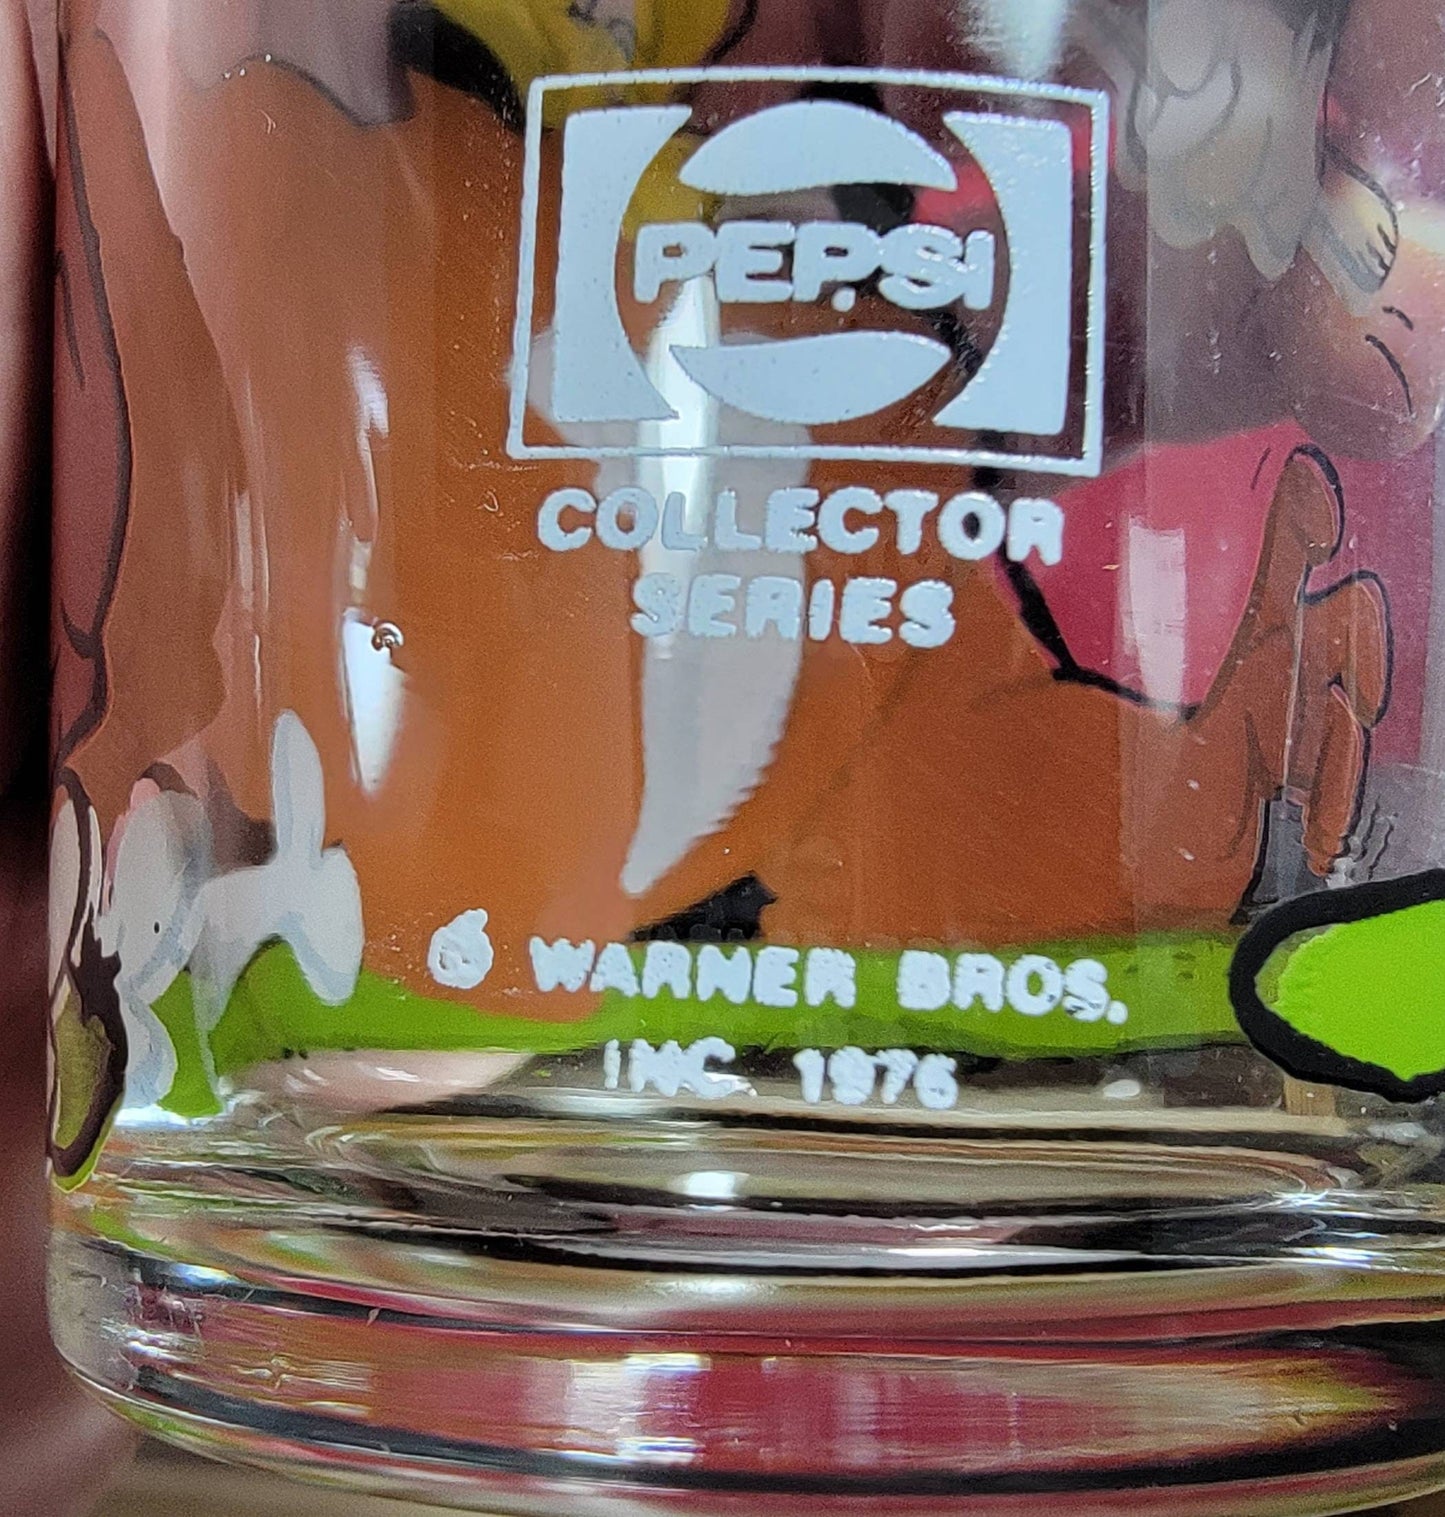 Pepsi glass with Sylvester and tweety bird glass (1976)